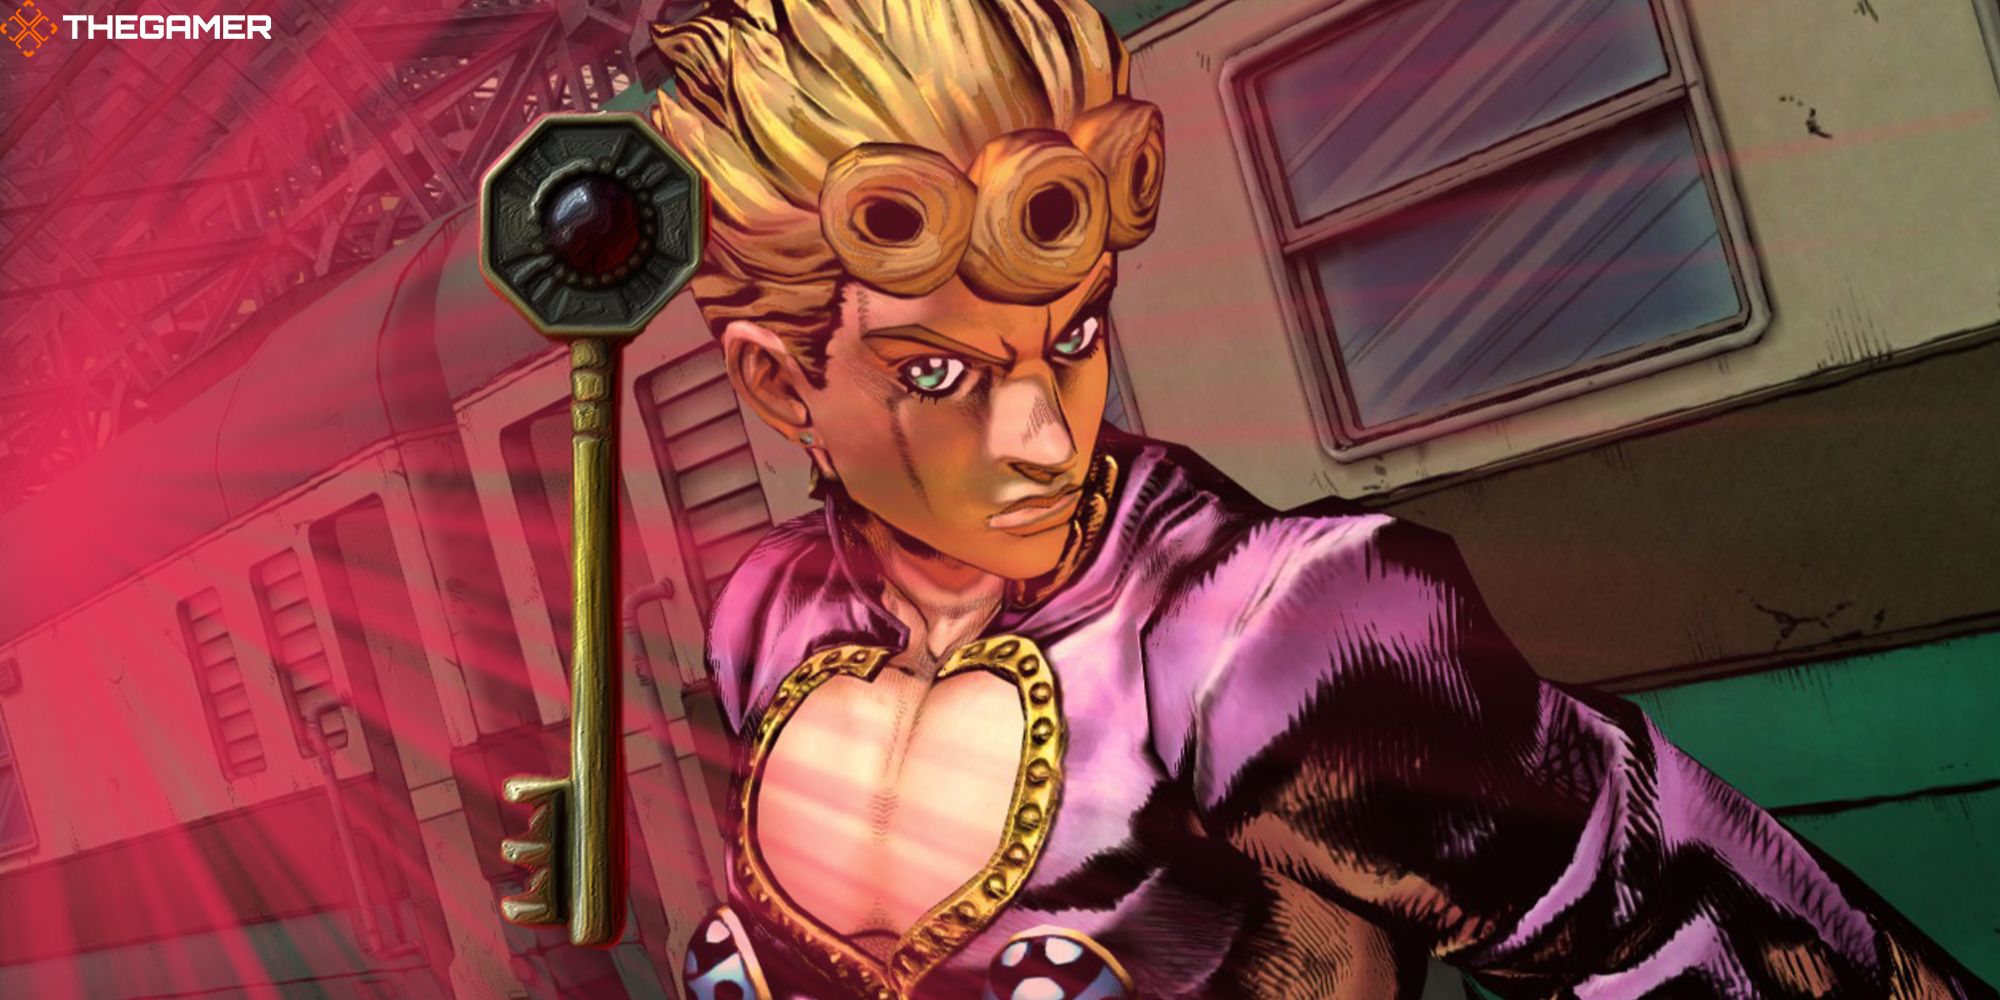 Giorno poses alongside the images that inspired them : r